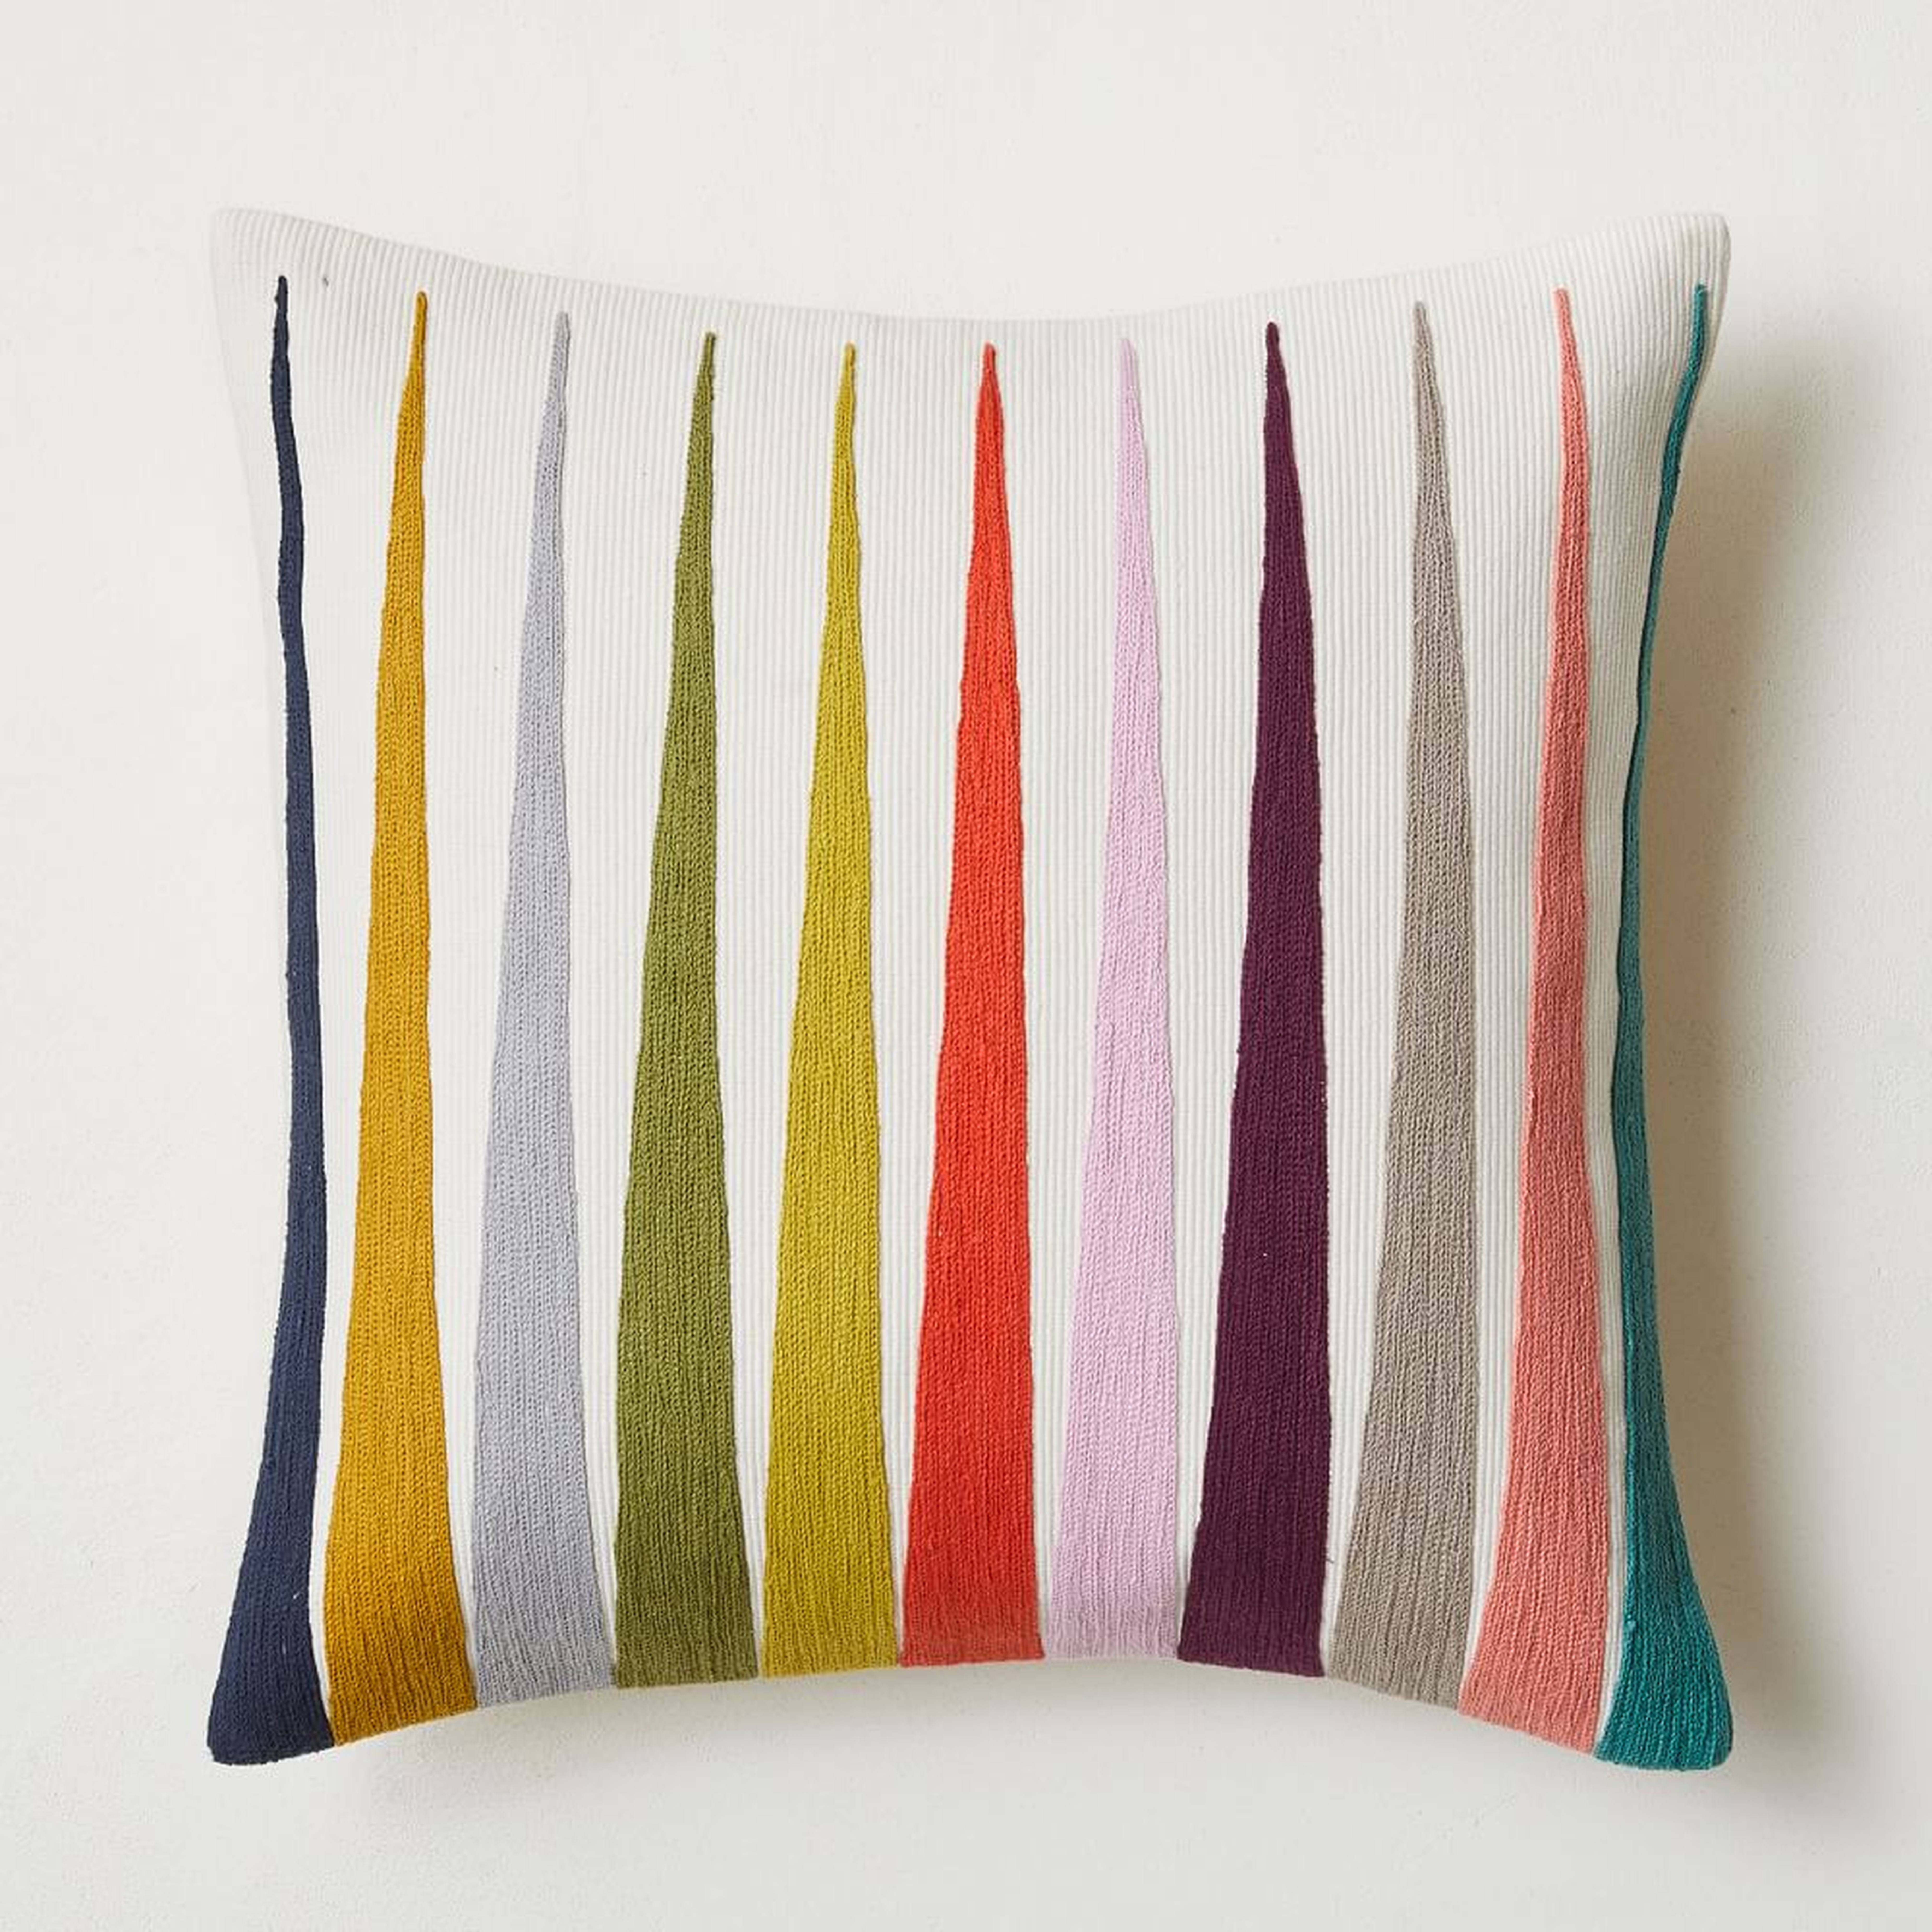 Margo Selby Spliced Lines Pillow Cover, 20"x20", Multi, Set of 2 - West Elm